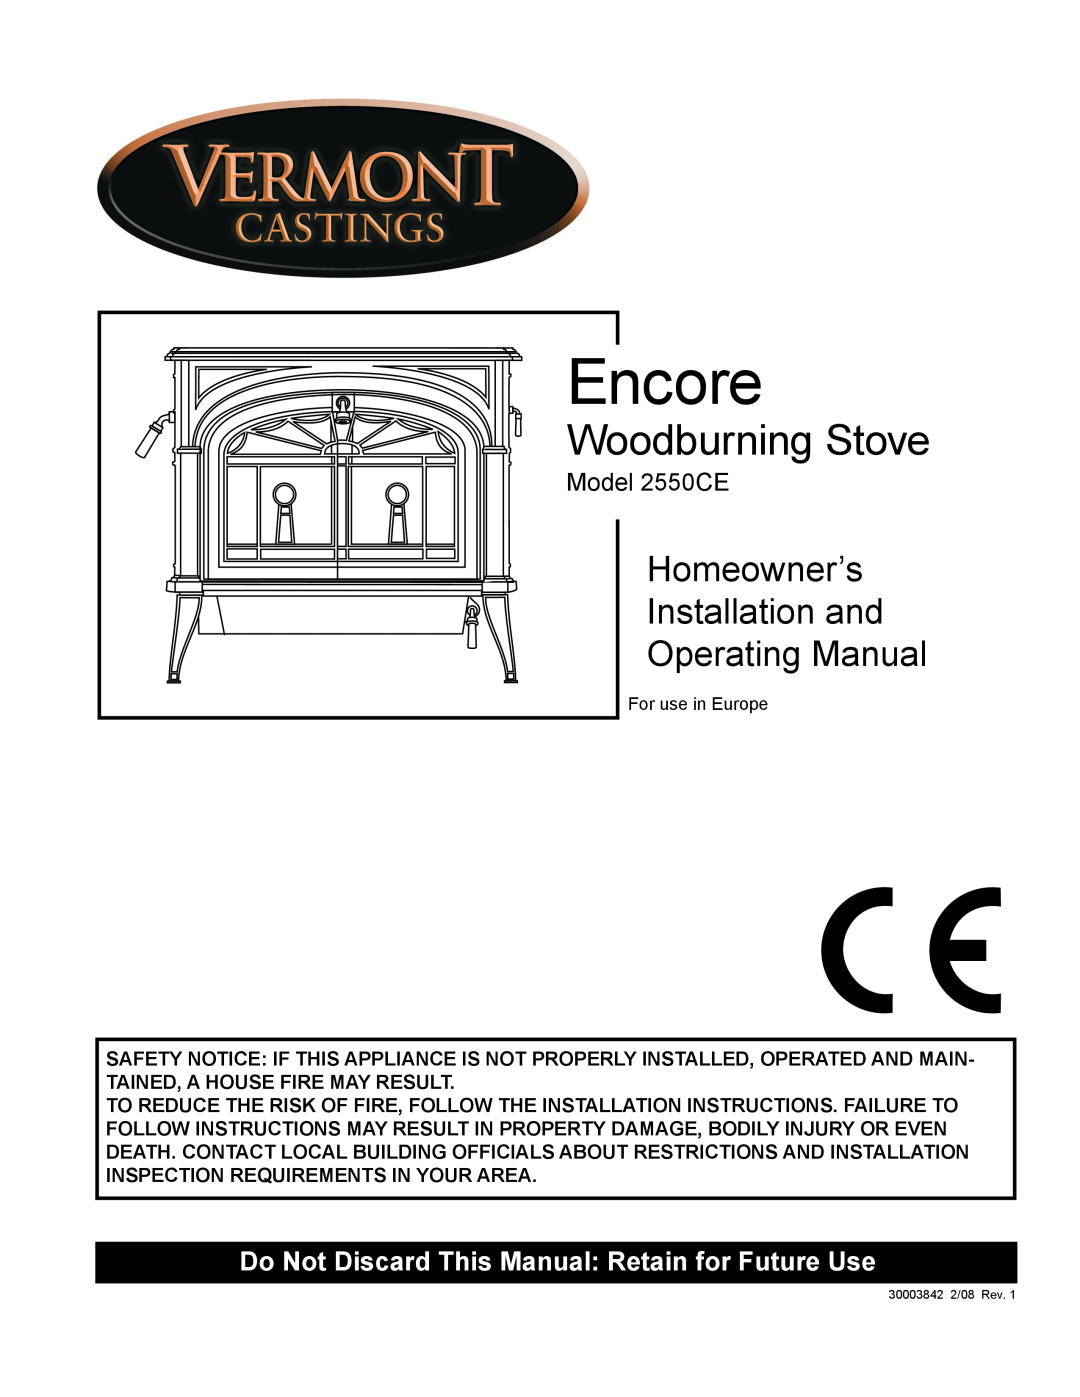 Vermont Casting 2550CE installation instructions Encore, Woodburning Stove, Homeowner’s Installation and Operating Manual 